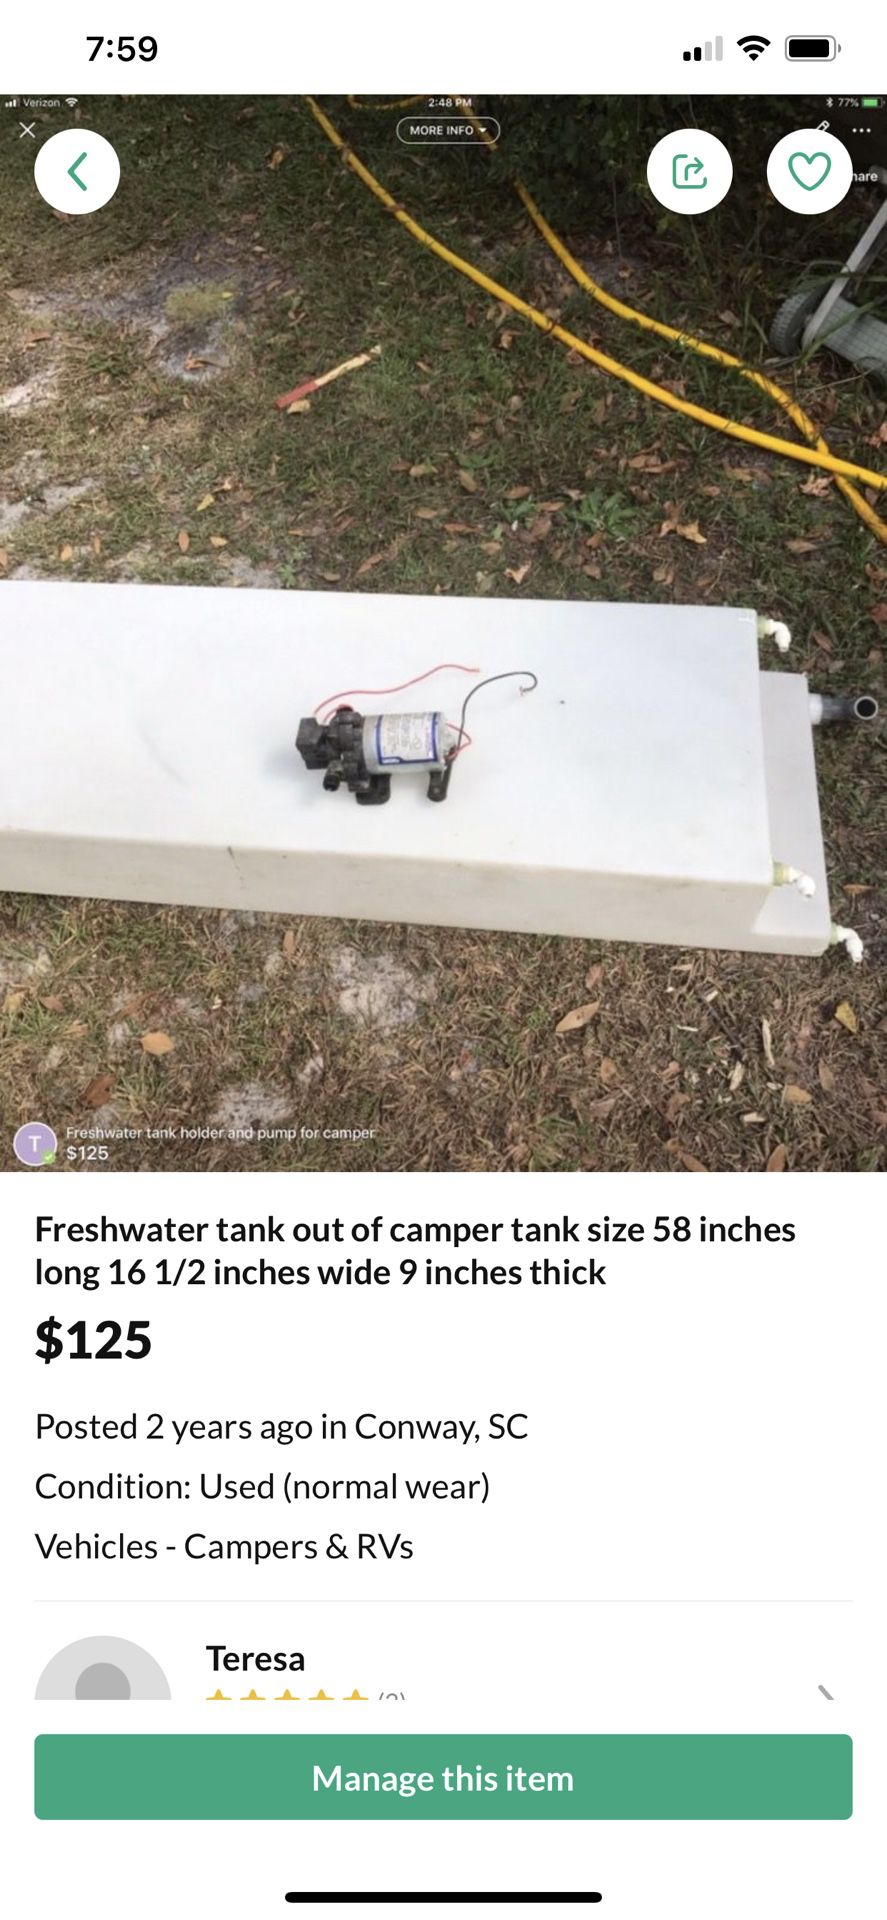 Freshwater tank out of camper tank size 58 inches long 16 1/2 inches wide 9 inches thick